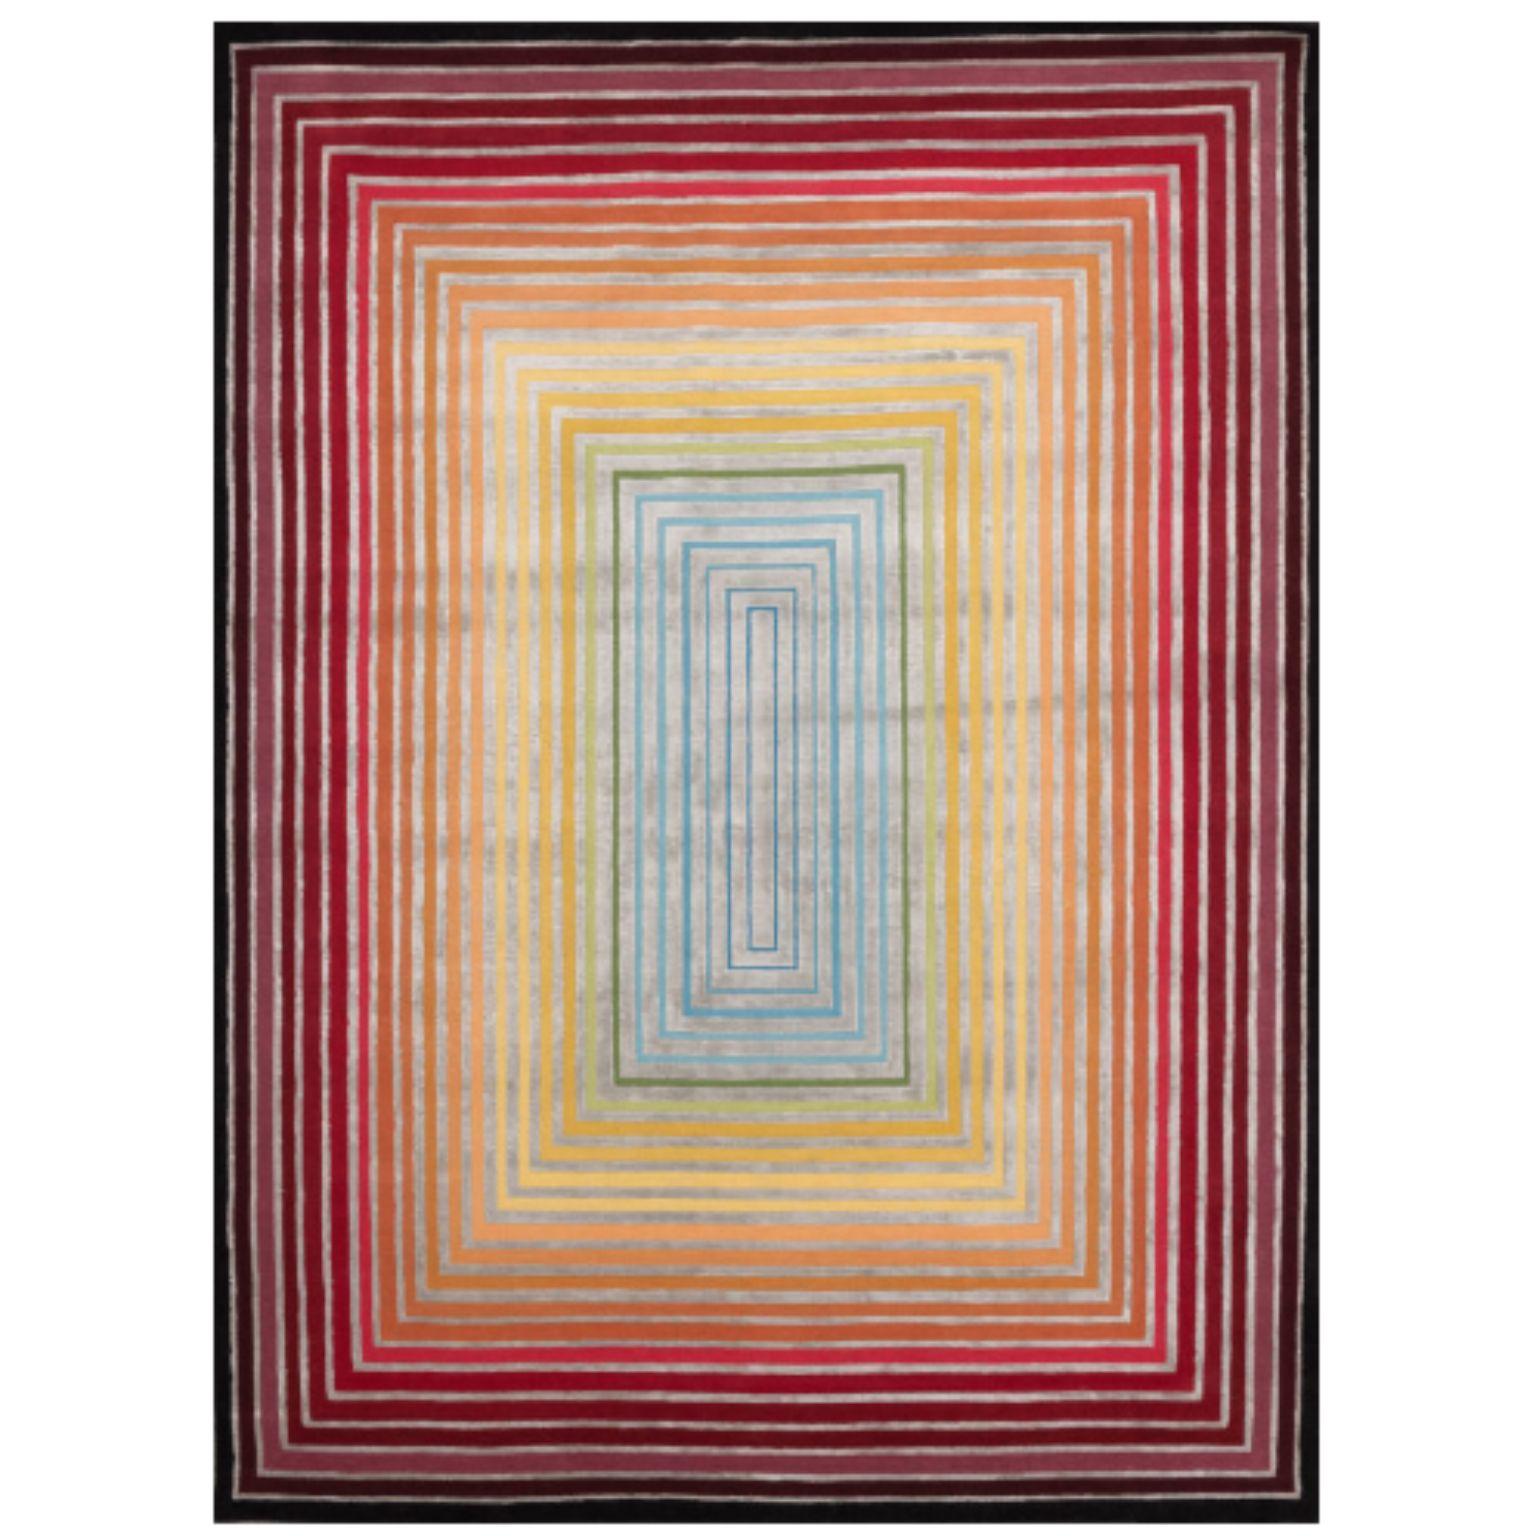 REHAB 200 rug by Illulian
Dimensions: D300 x H200 cm 
Materials: wool 50%, silk 50%
Variations available and prices may vary according to materials and sizes. 

Illulian, historic and prestigious rug company brand, internationally renowned in